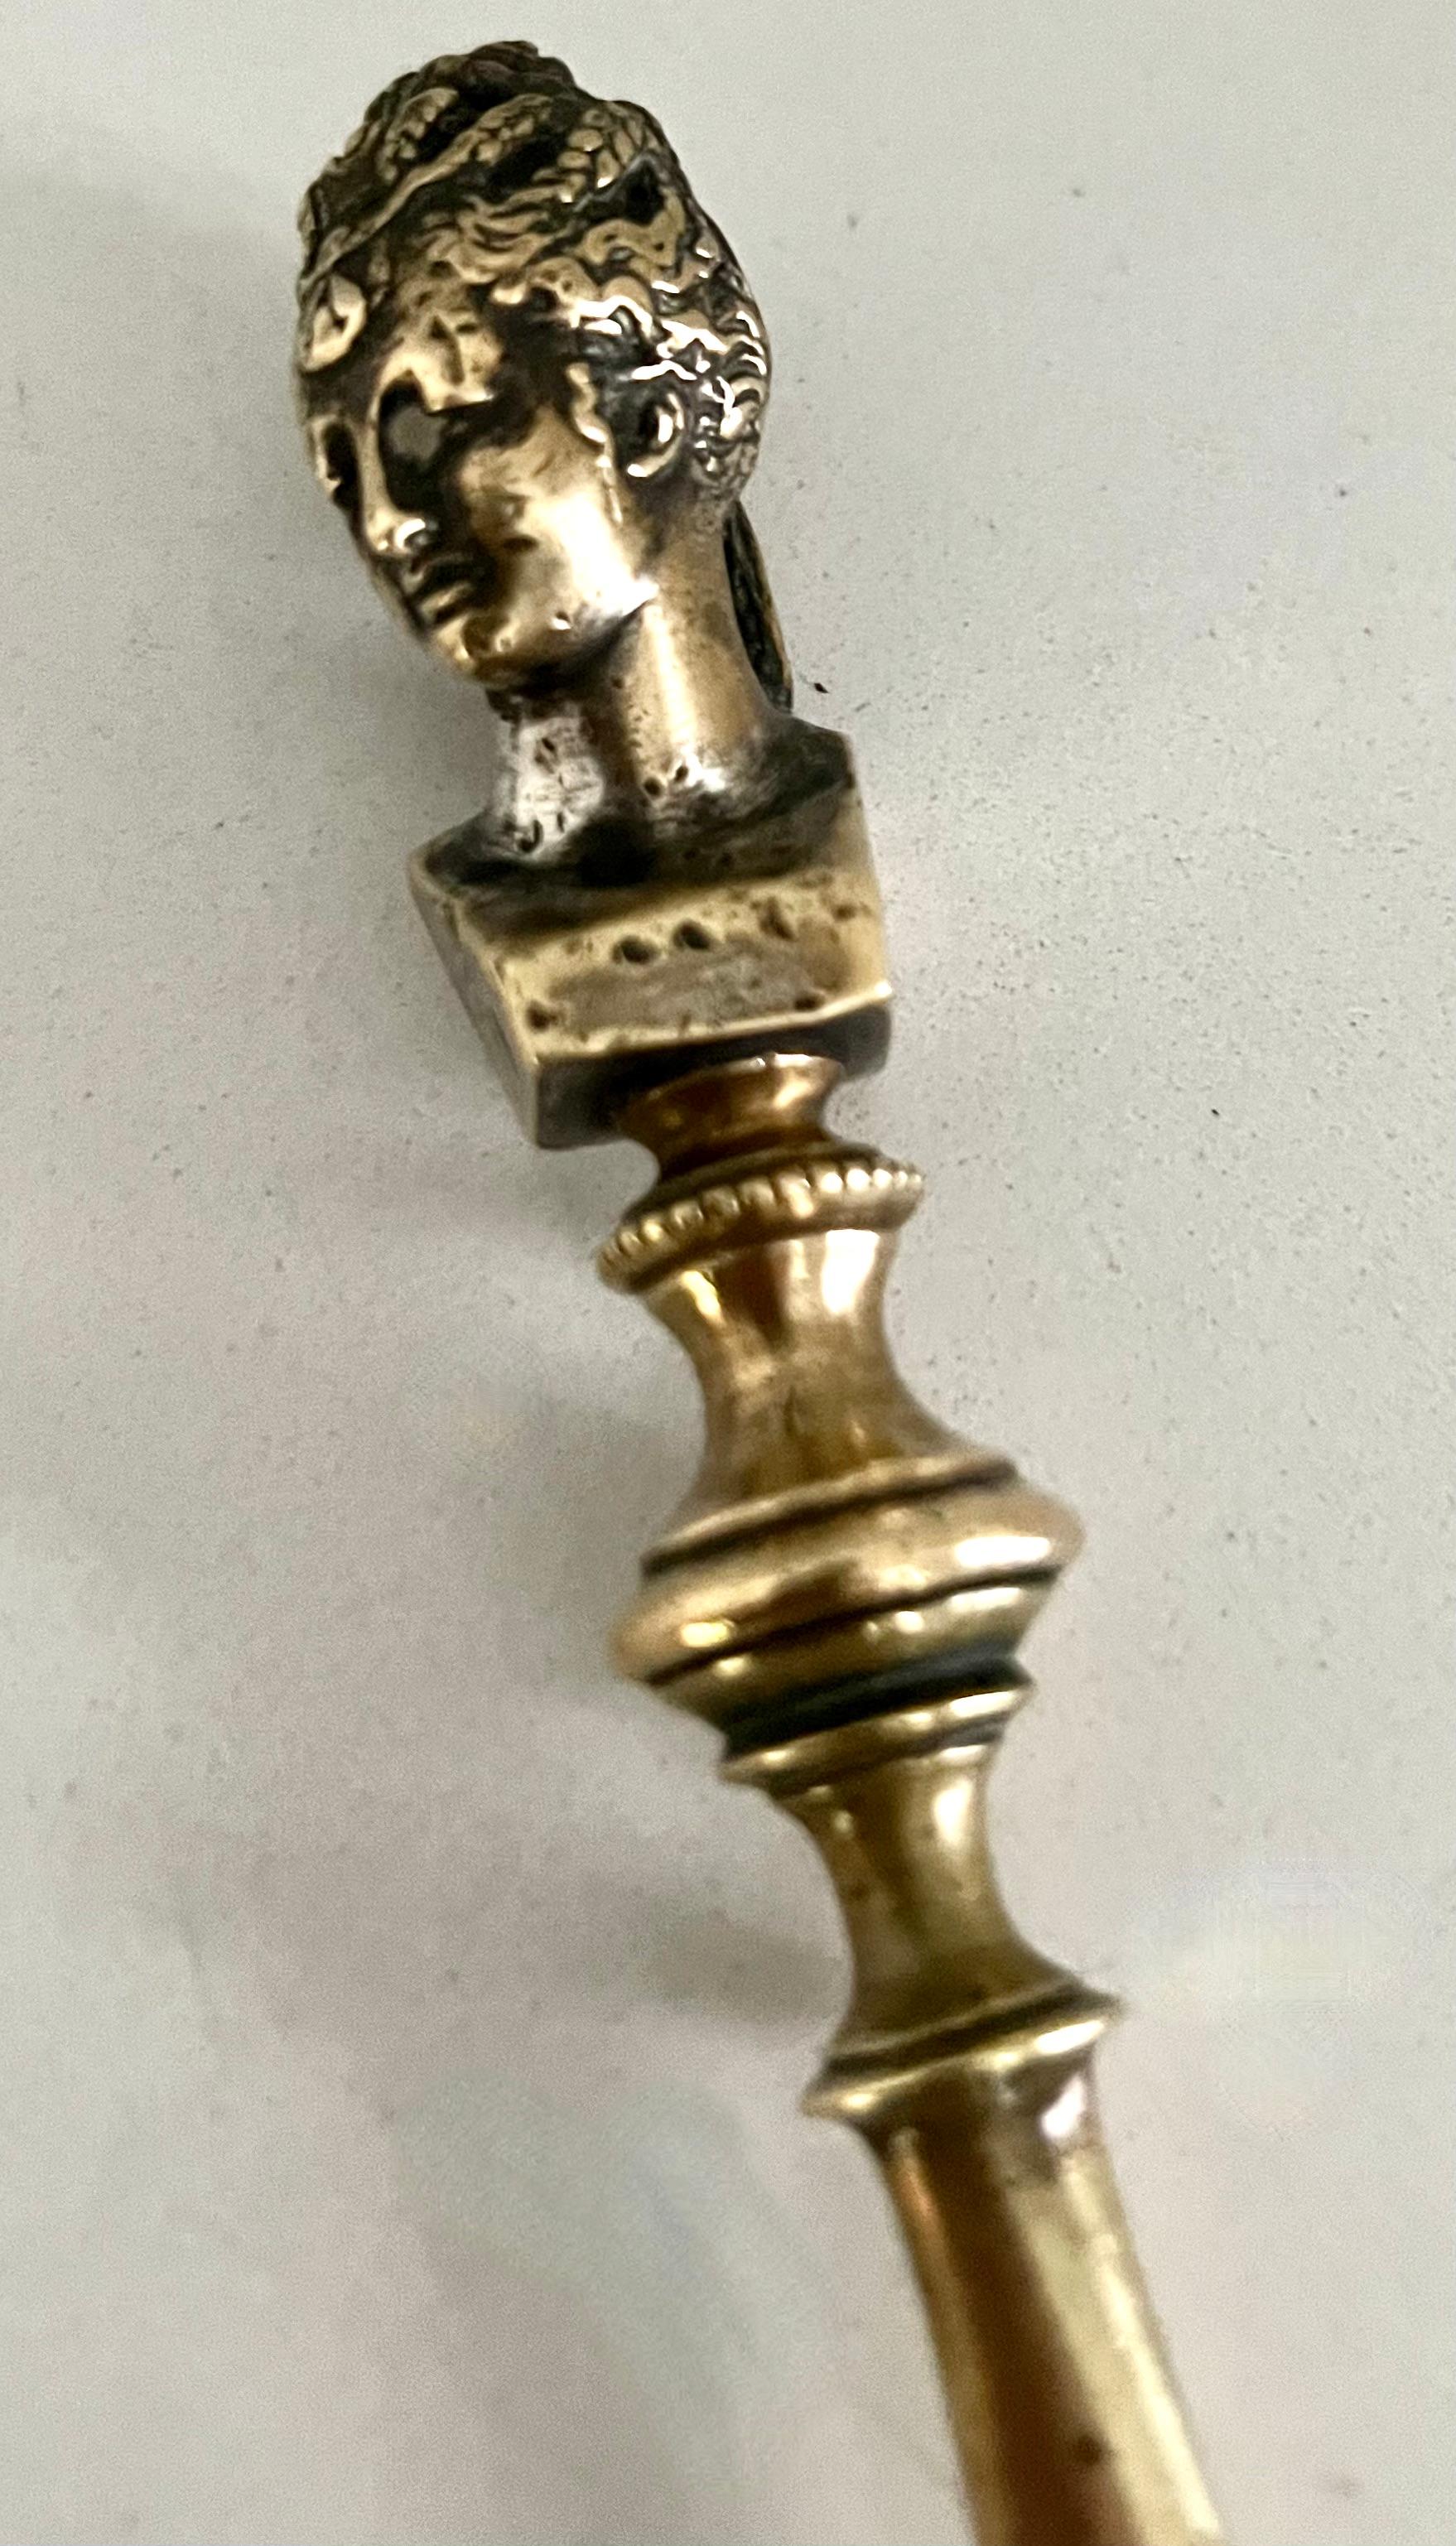 A wonderful 19th century letter opener acquired in Paris France. The piece has the bust of a period lady at the top and is very sophisticated and elegant. A compliment to any desk or work station.